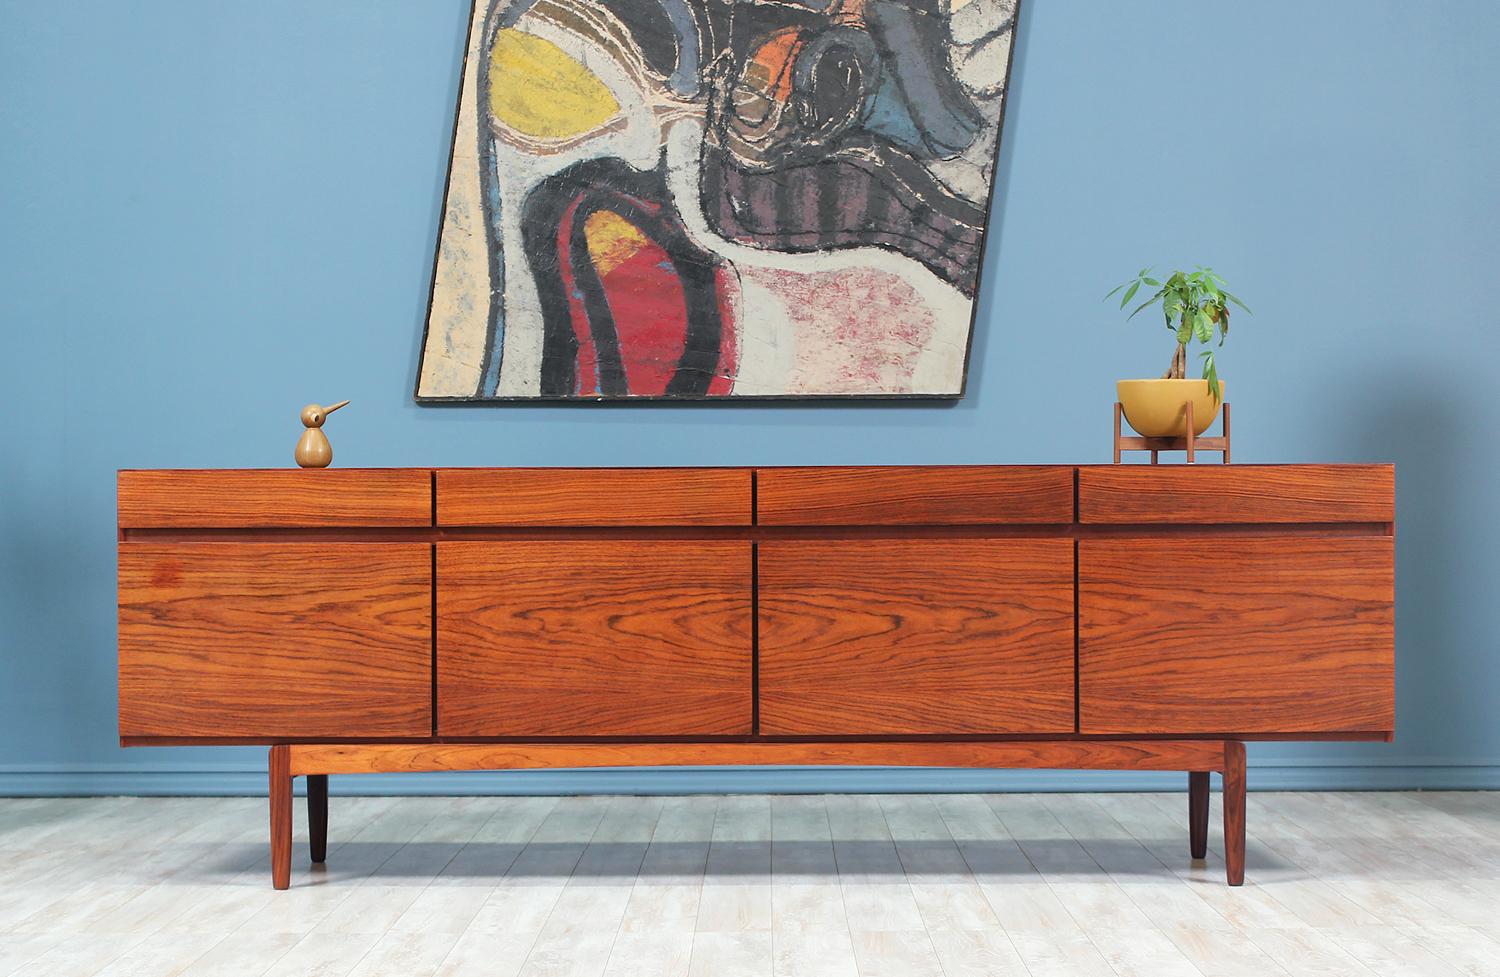 Elegant credenza designed by Ib Kofod-Larsen for Faarup Møbelfabrik in Denmark, circa 1950s. This credenza is comprised of a sturdy rosewood case with a gorgeous and intricate grain on the front and throughout. It features four push-open doors that